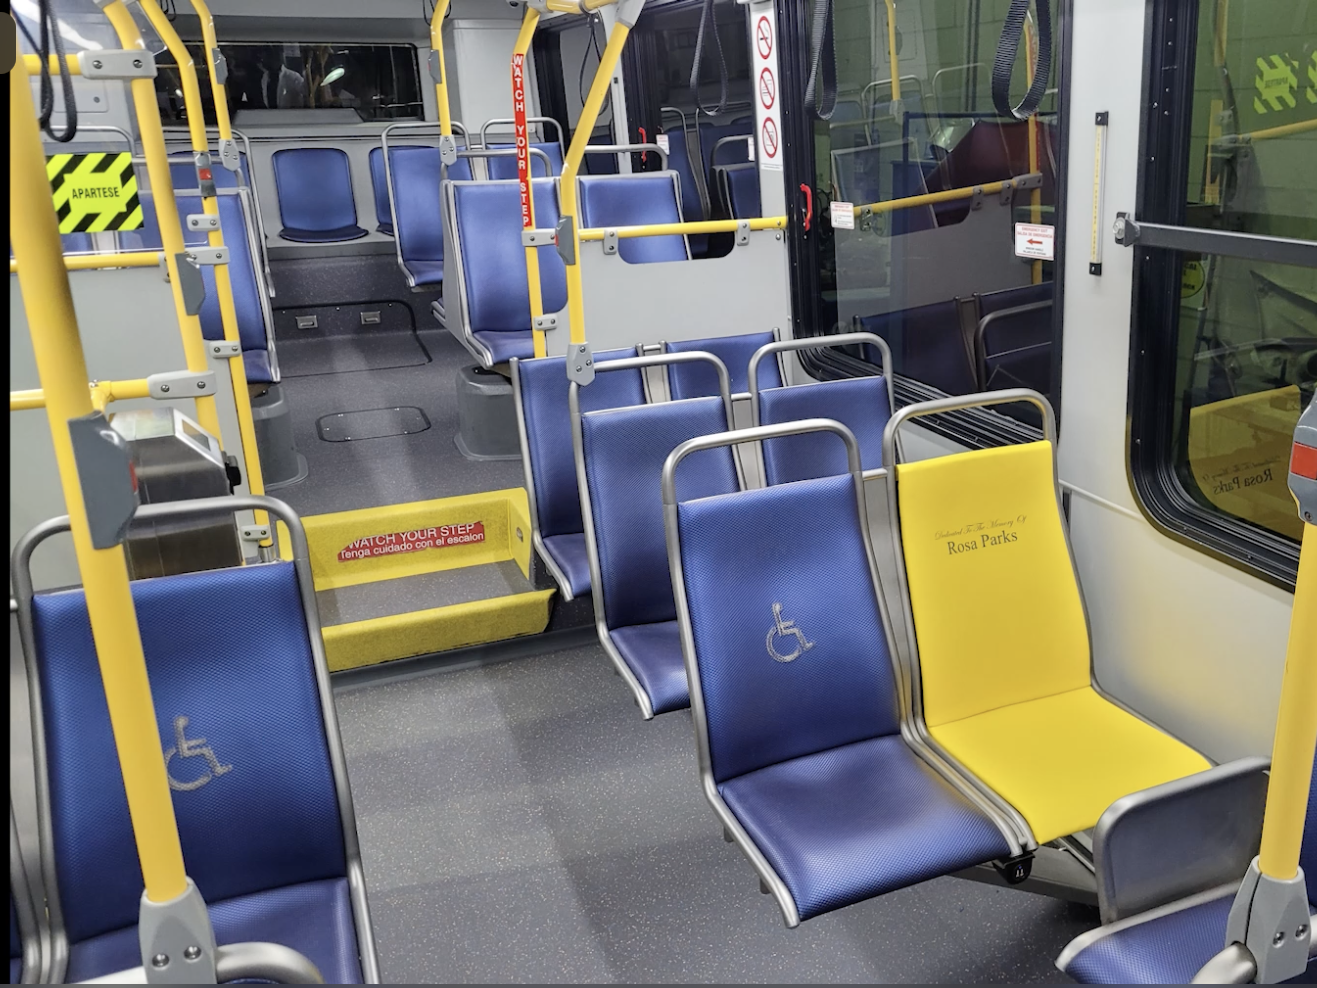 A photo of a bus in Houston with one yellow seat, intended to honor Rosa Parks.